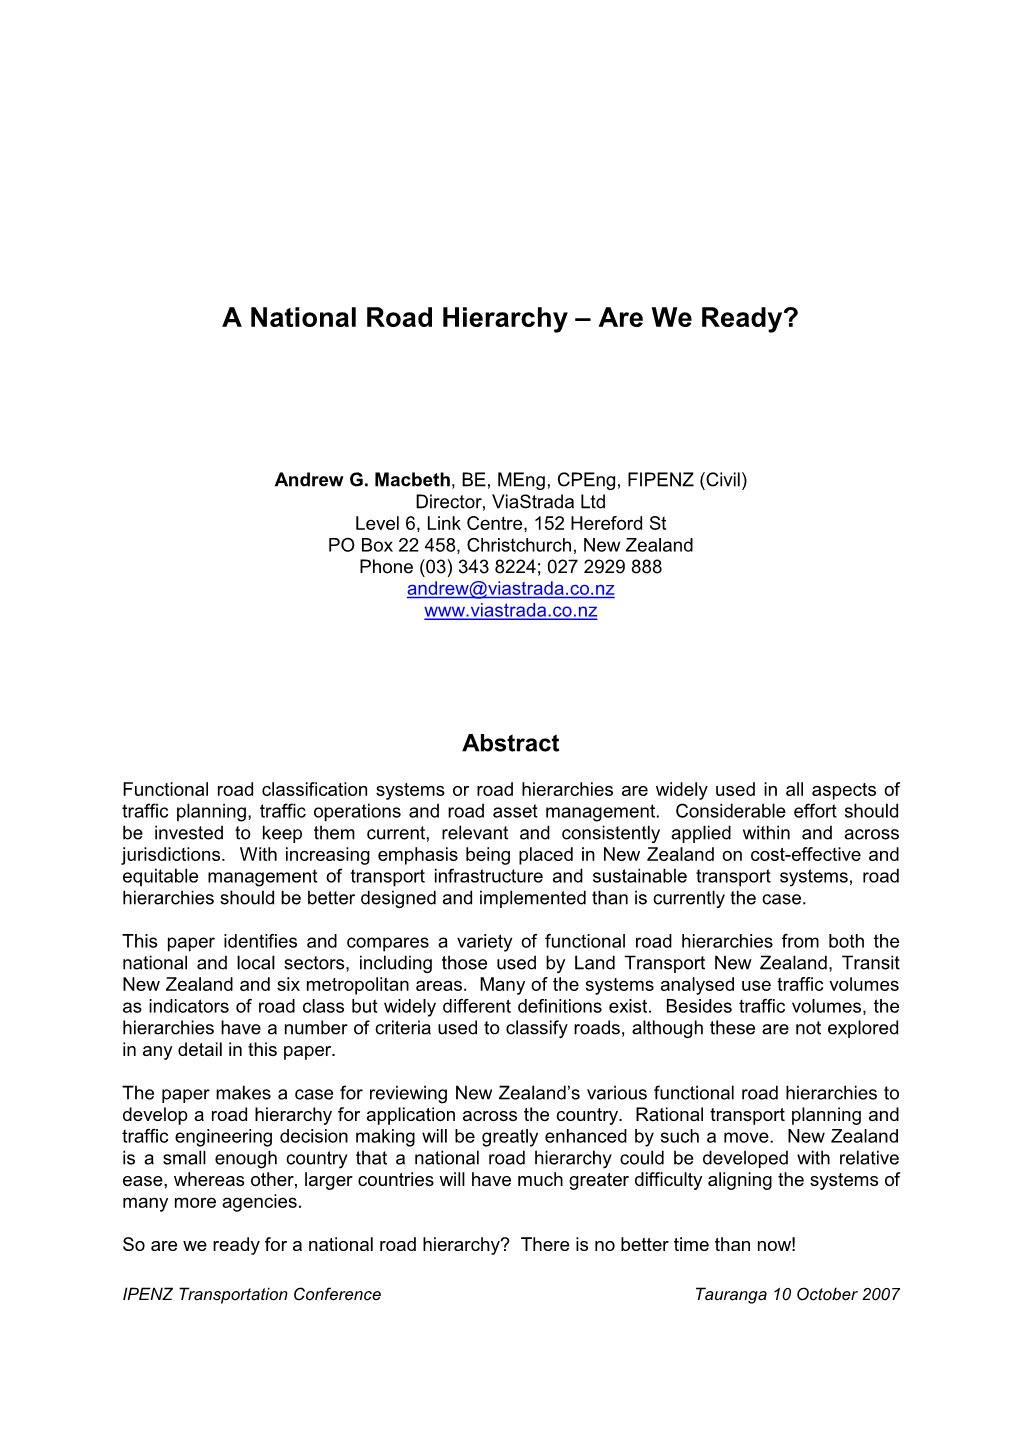 A National Road Hierarchy – Are We Ready?